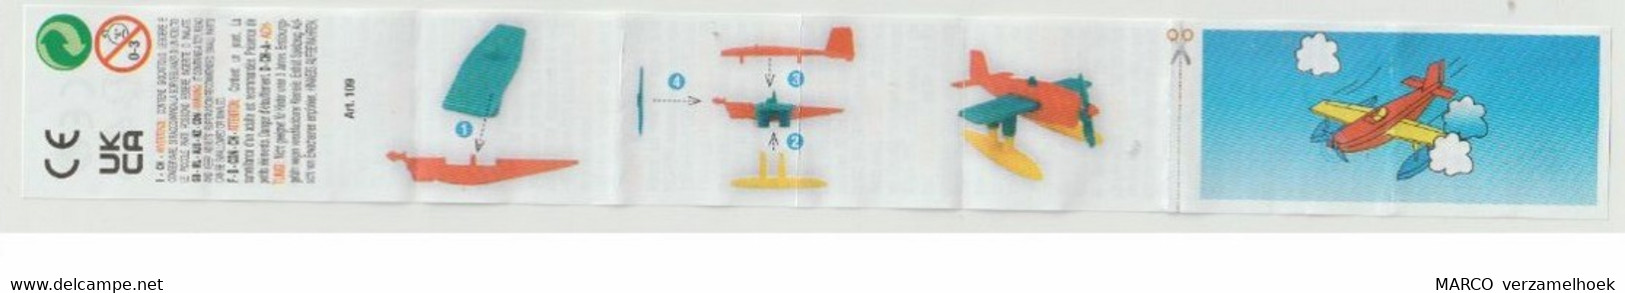 Handleiding Promotoys S.R.O. Piestany (SK) Art. 109 - Instructions